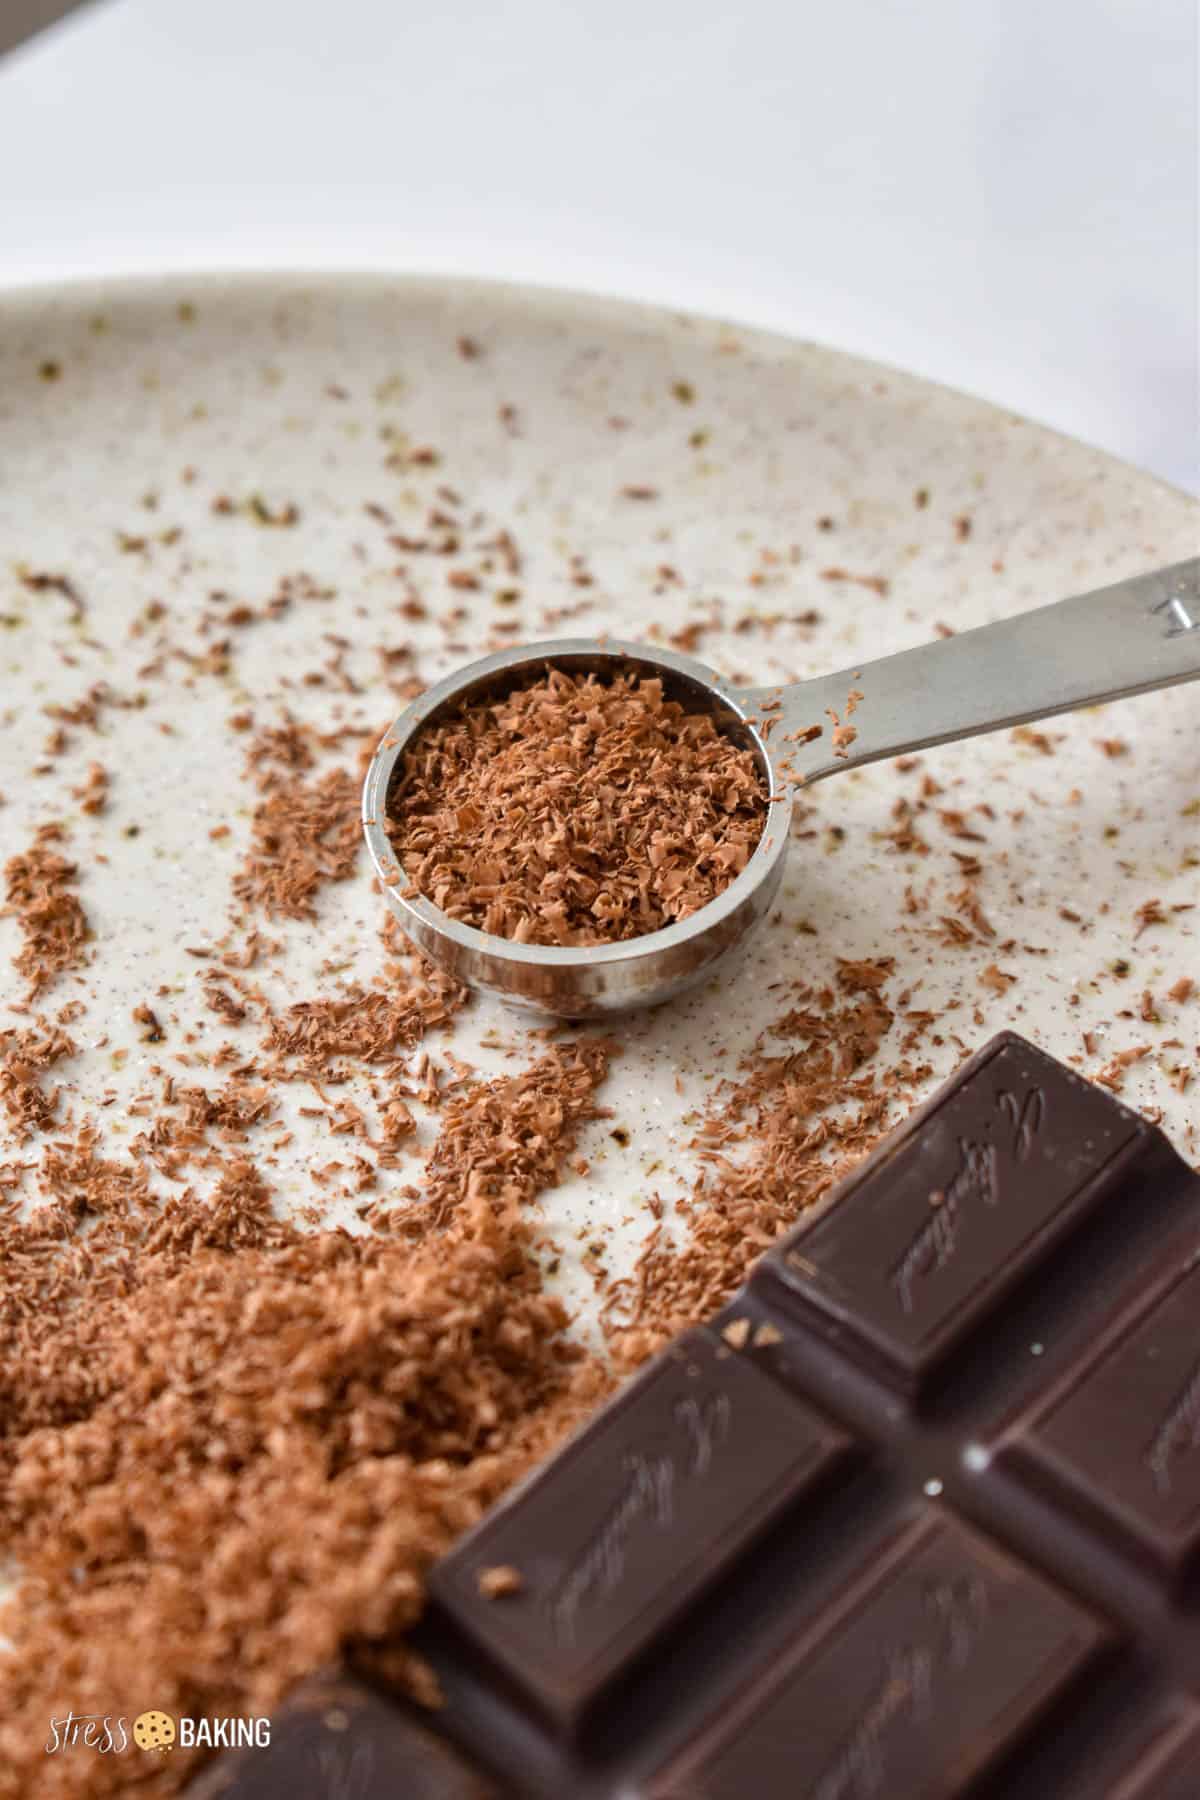 Grated chocolate in a measuring spoon